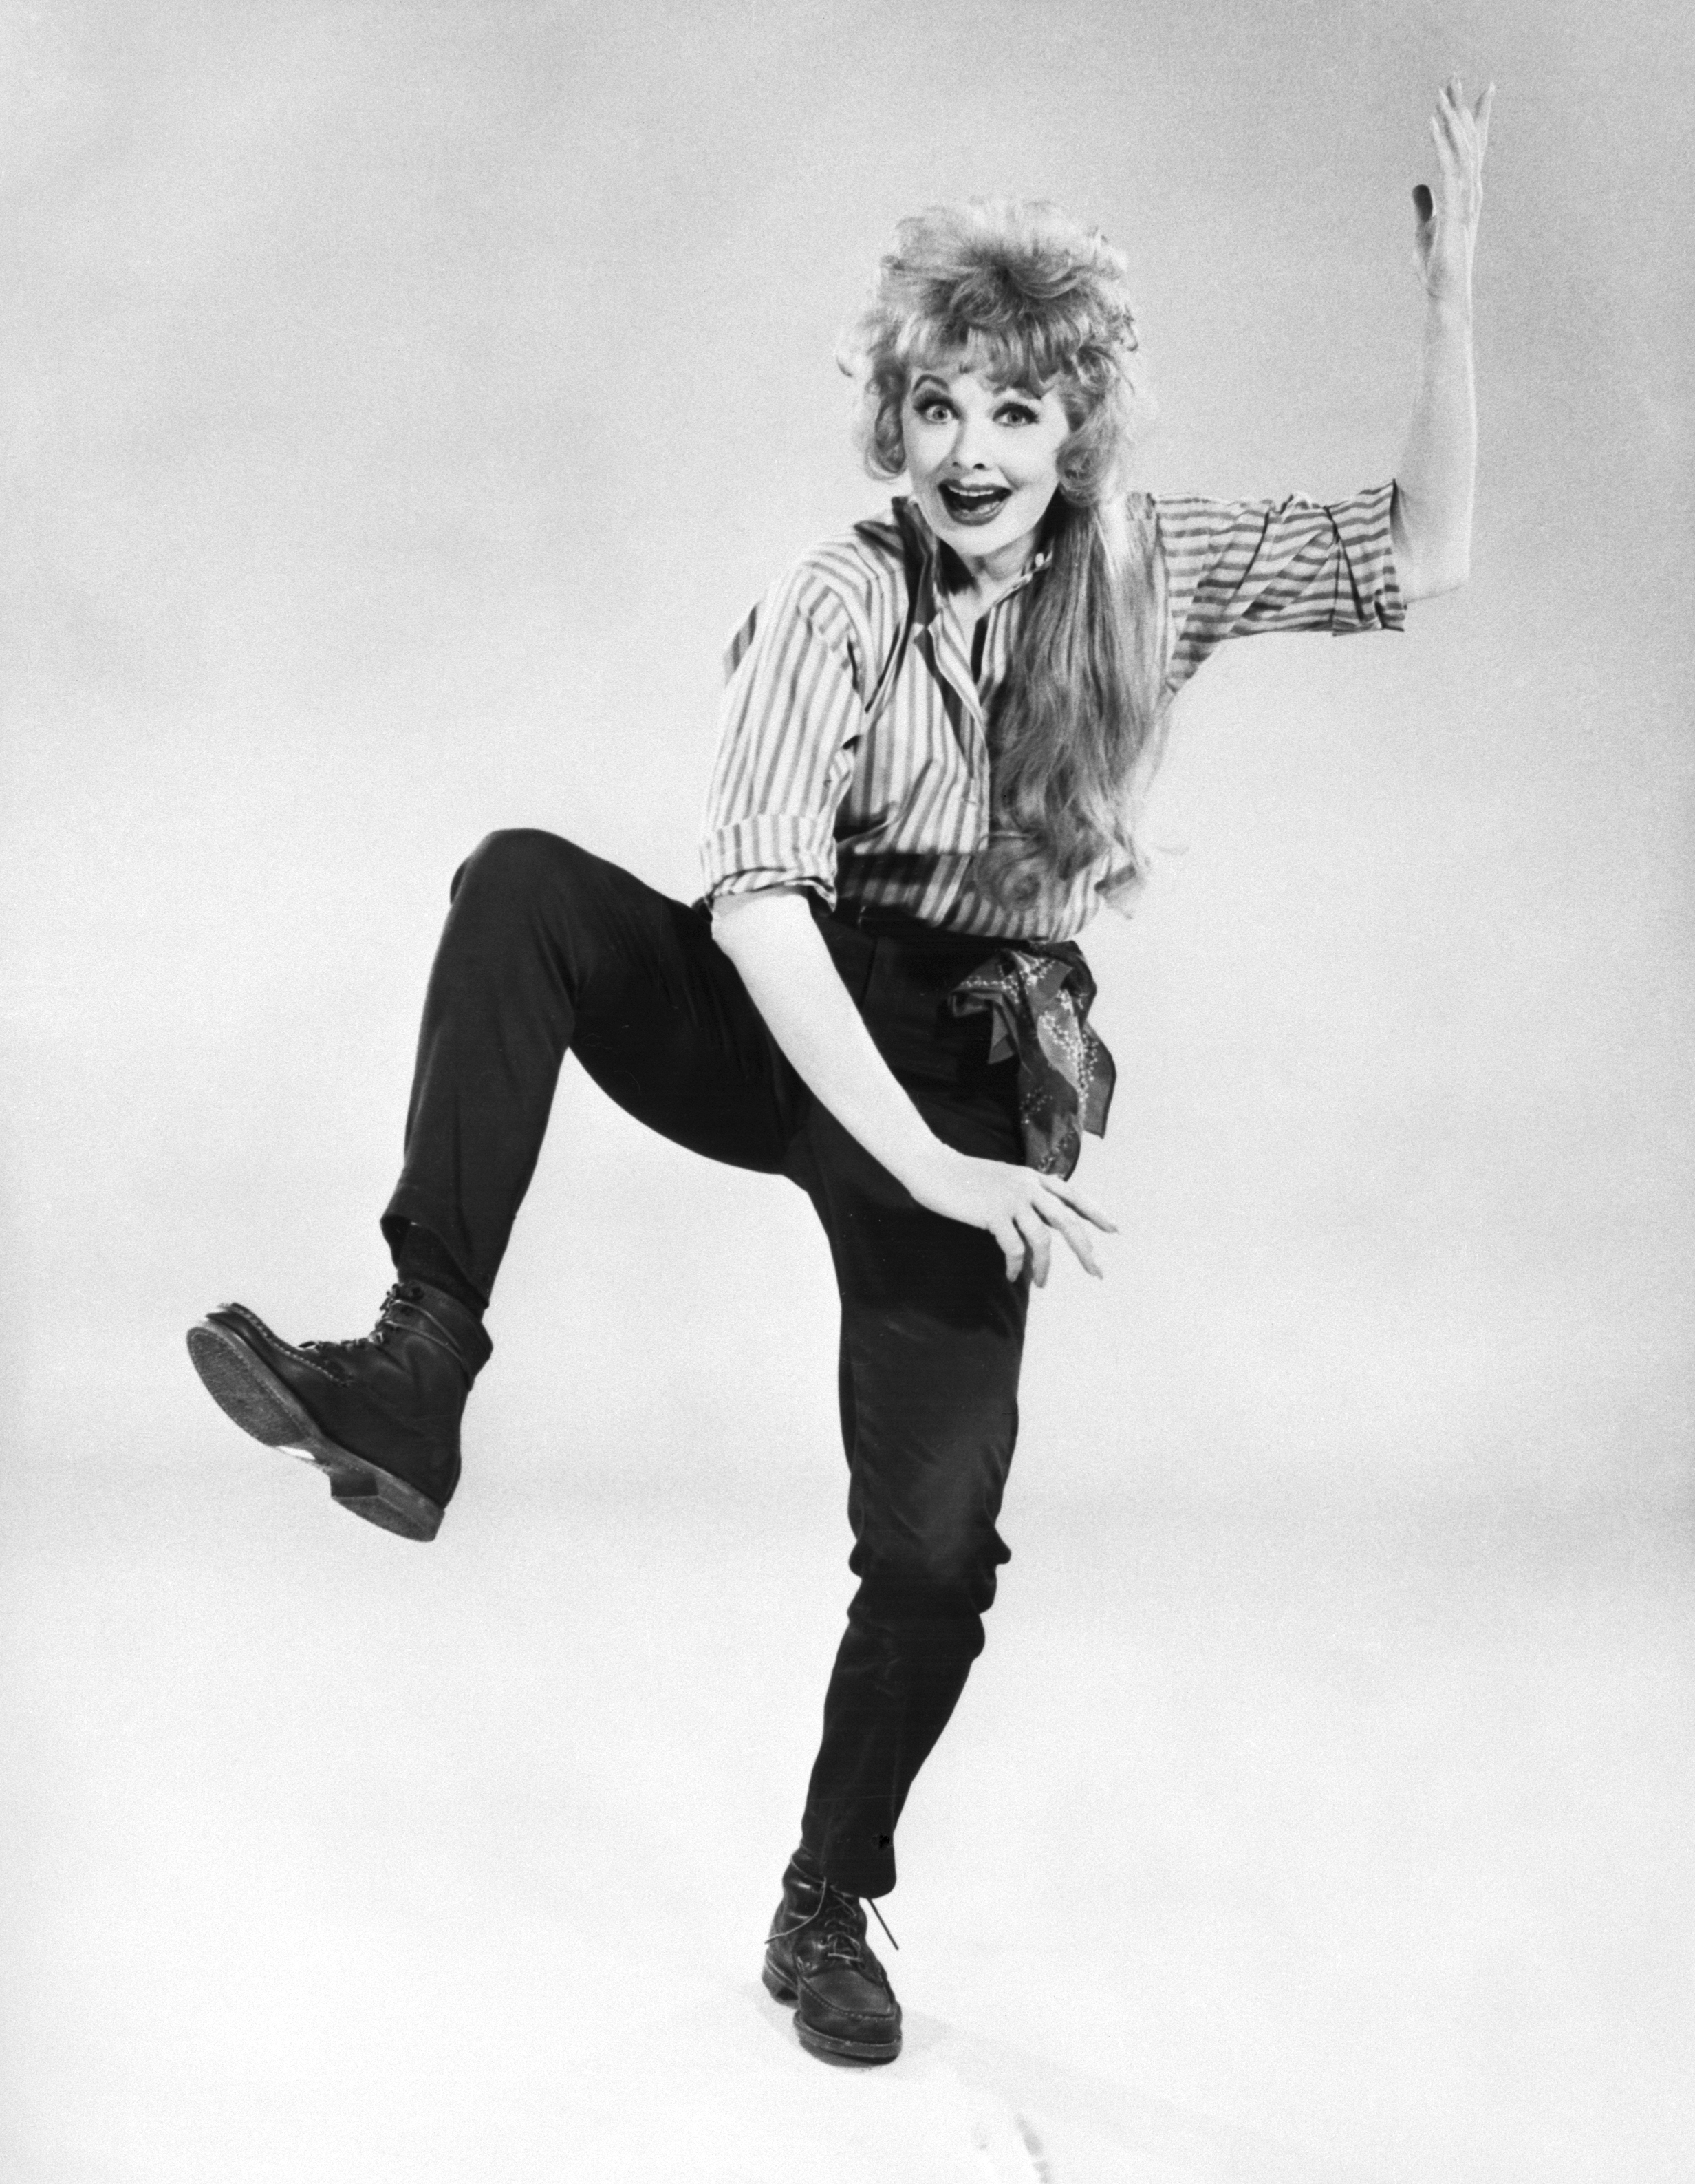 A person posing dynamically with one arm raised, wearing striped top, black pants, and boots